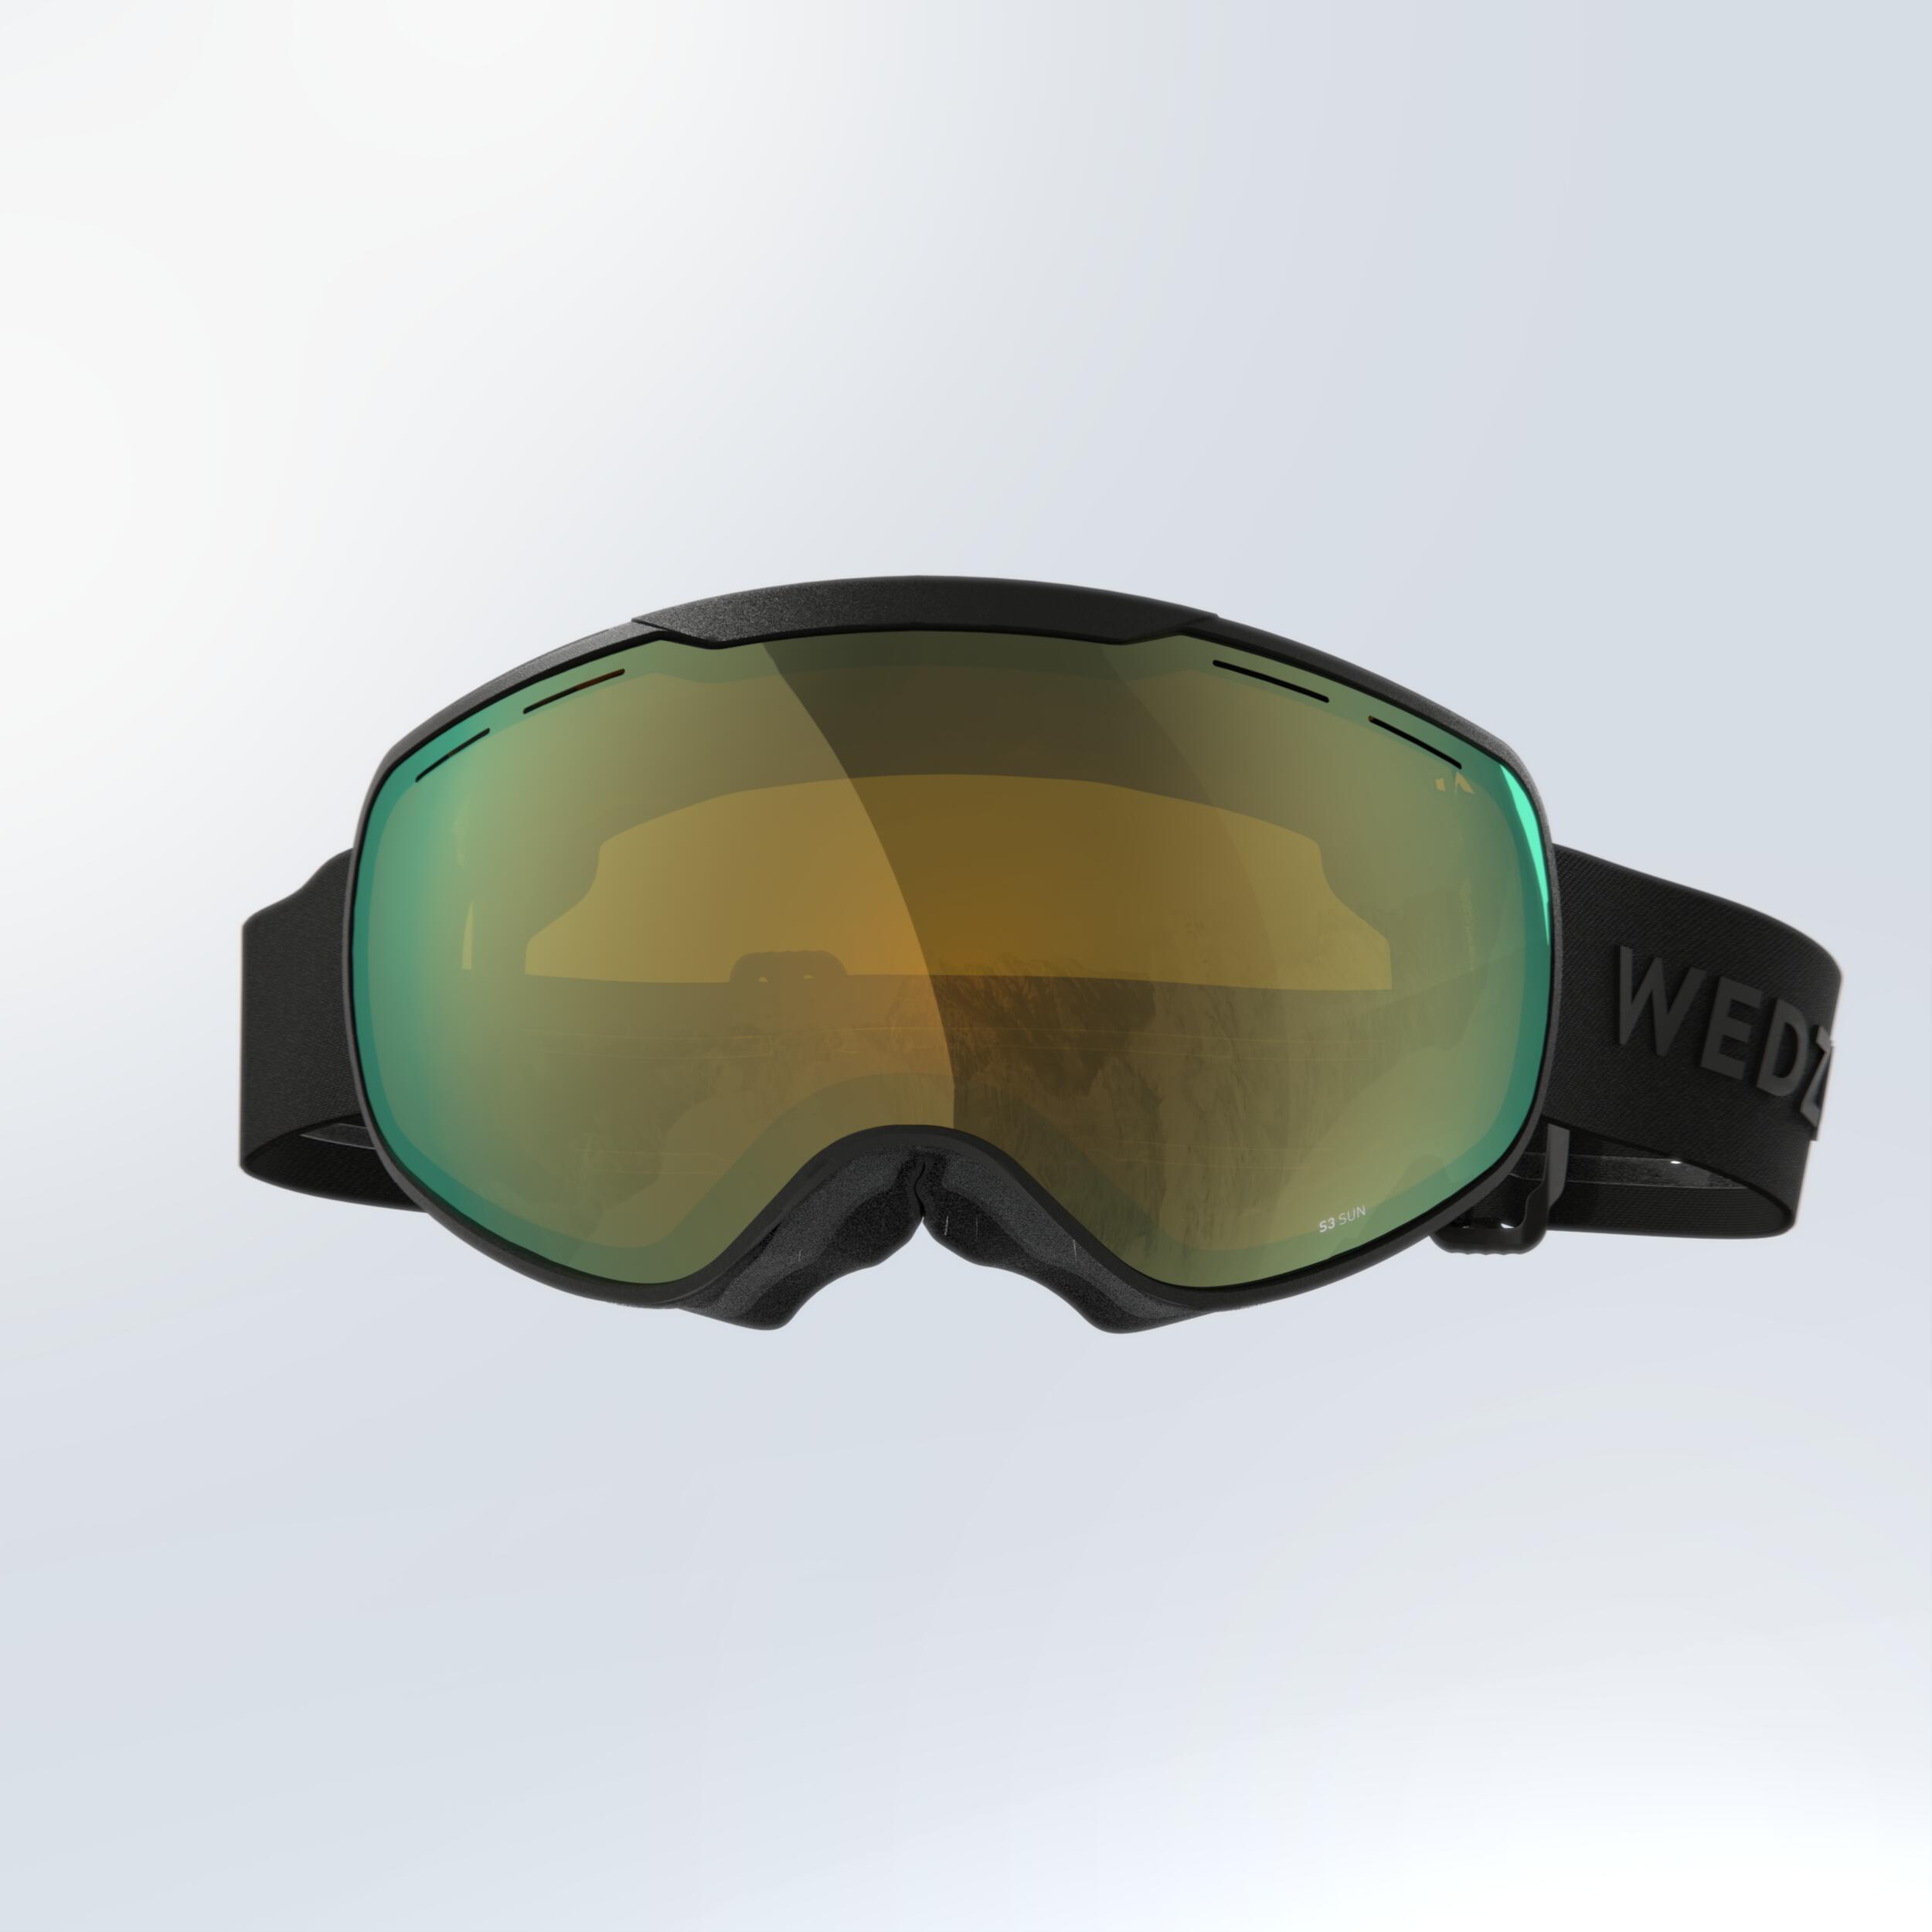 KIDS’ AND ADULT SKIING AND SNOWBOARDING GOGGLES GOOD WEATHER - G 900 S3 - BLACK 2/5